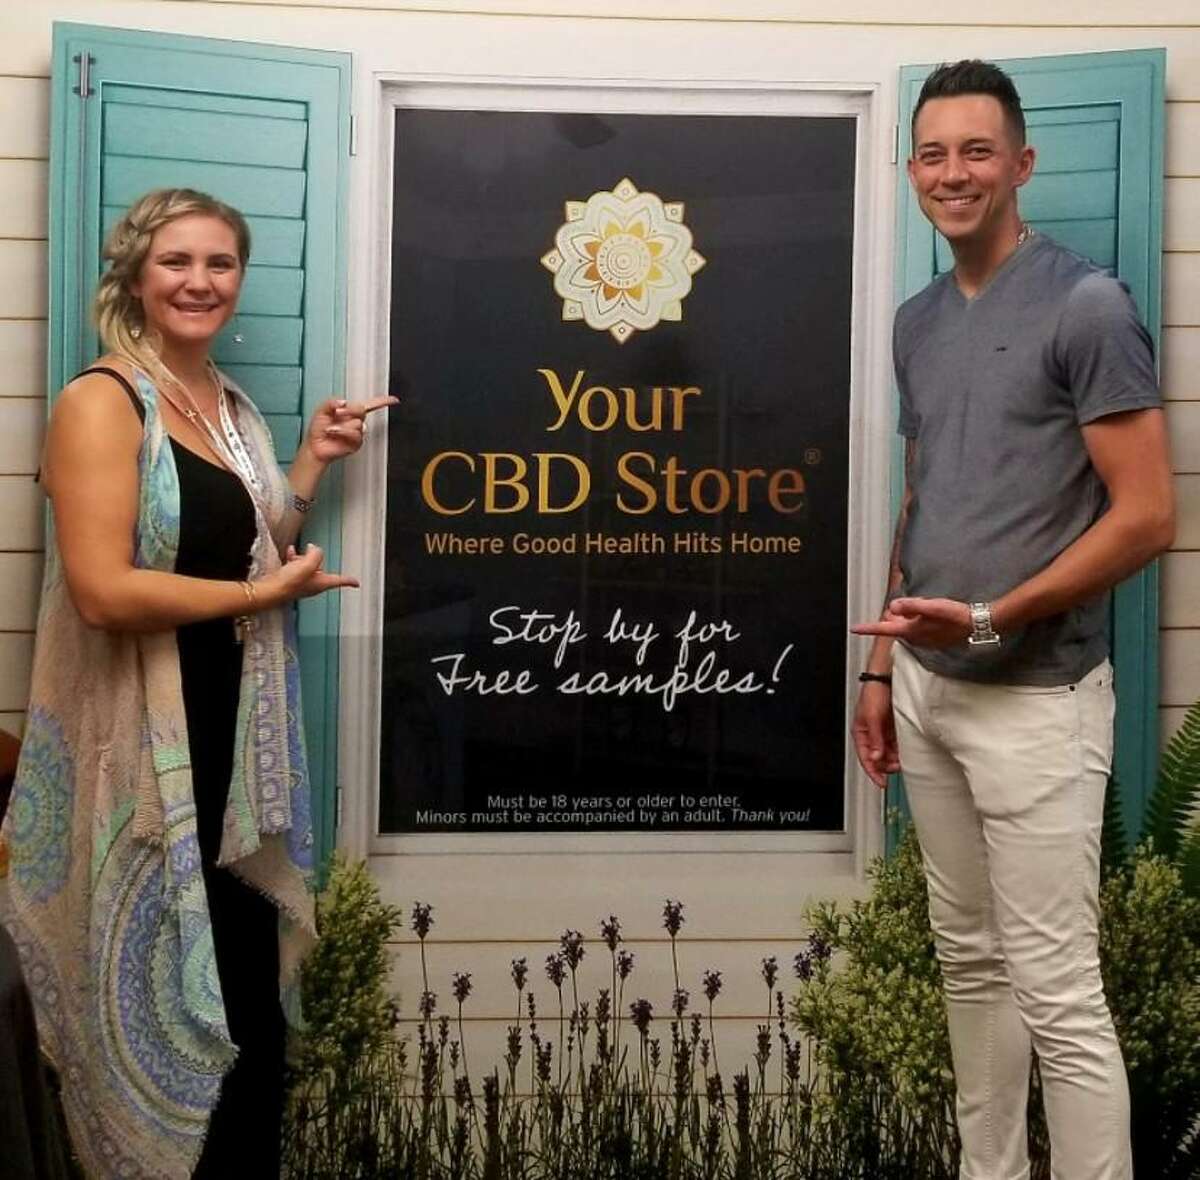 Clayton Percy, domestic franchisee director, right, and Jillian Shipchack, events coordinator, for Your CBD Stores, opened the first Connecticut-based Your CBD Store in Milford during June, 2018. There are now 22 stores in the state, with ten leases pending.